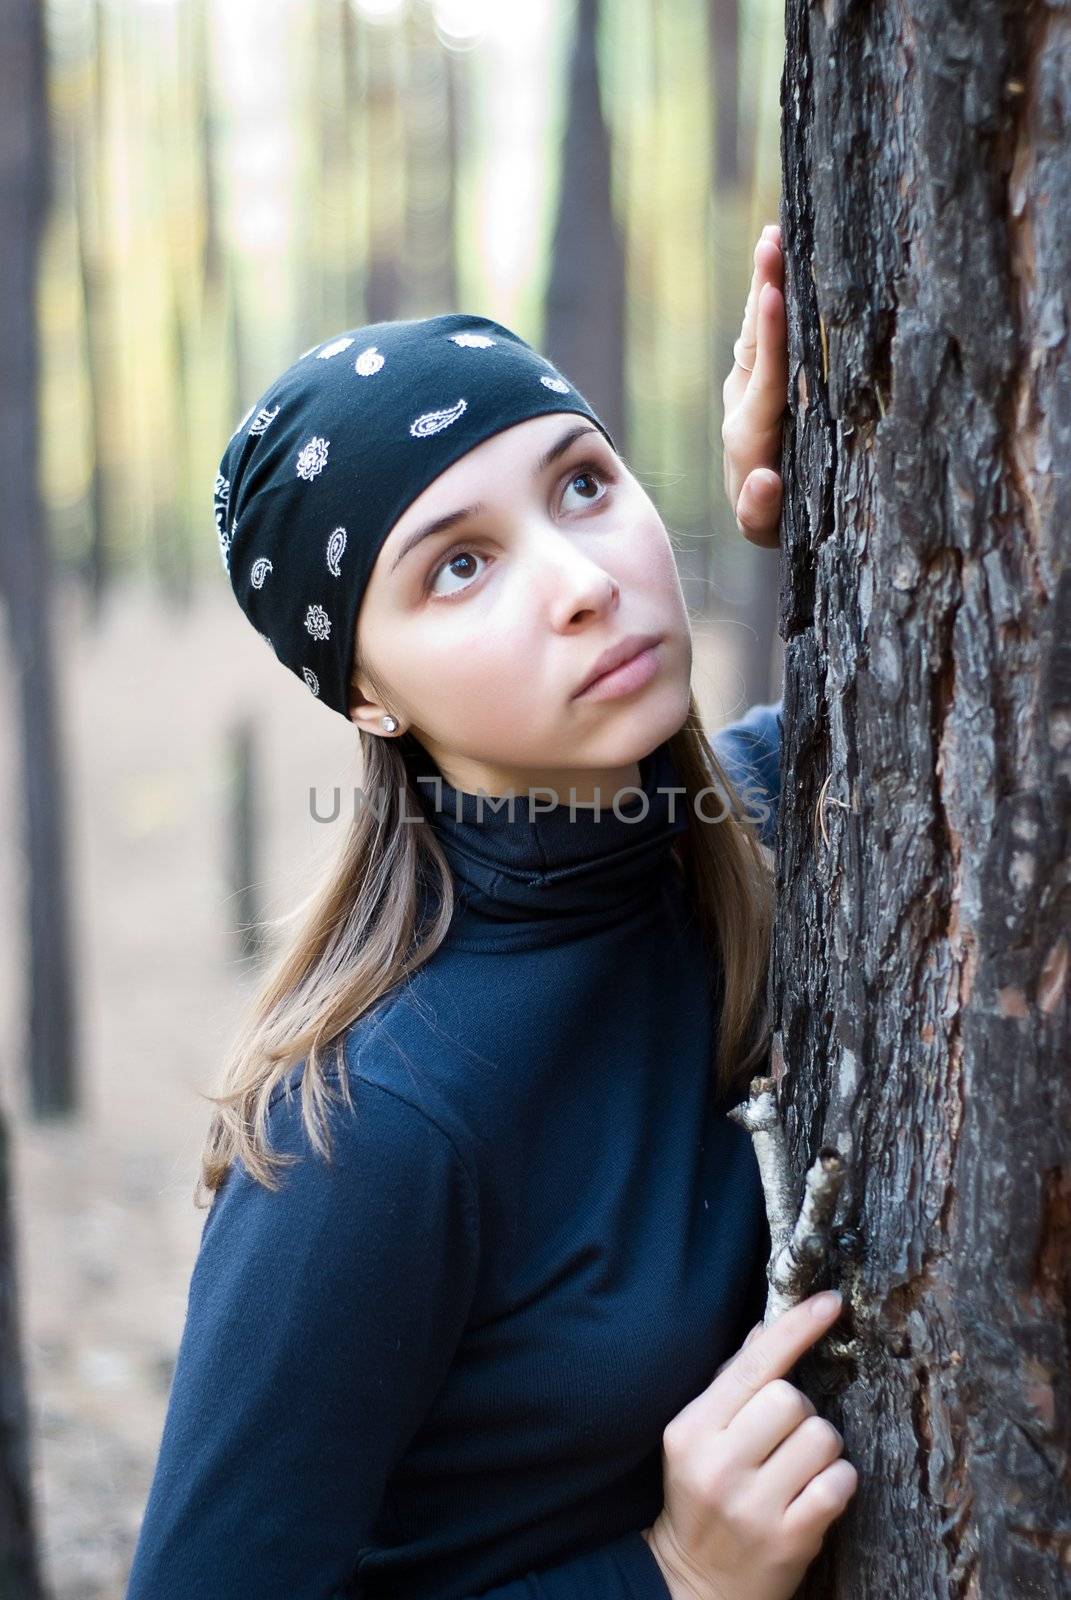 dreaming beautiful girl with bandana in the woods leaning against the trunk of a pine tree